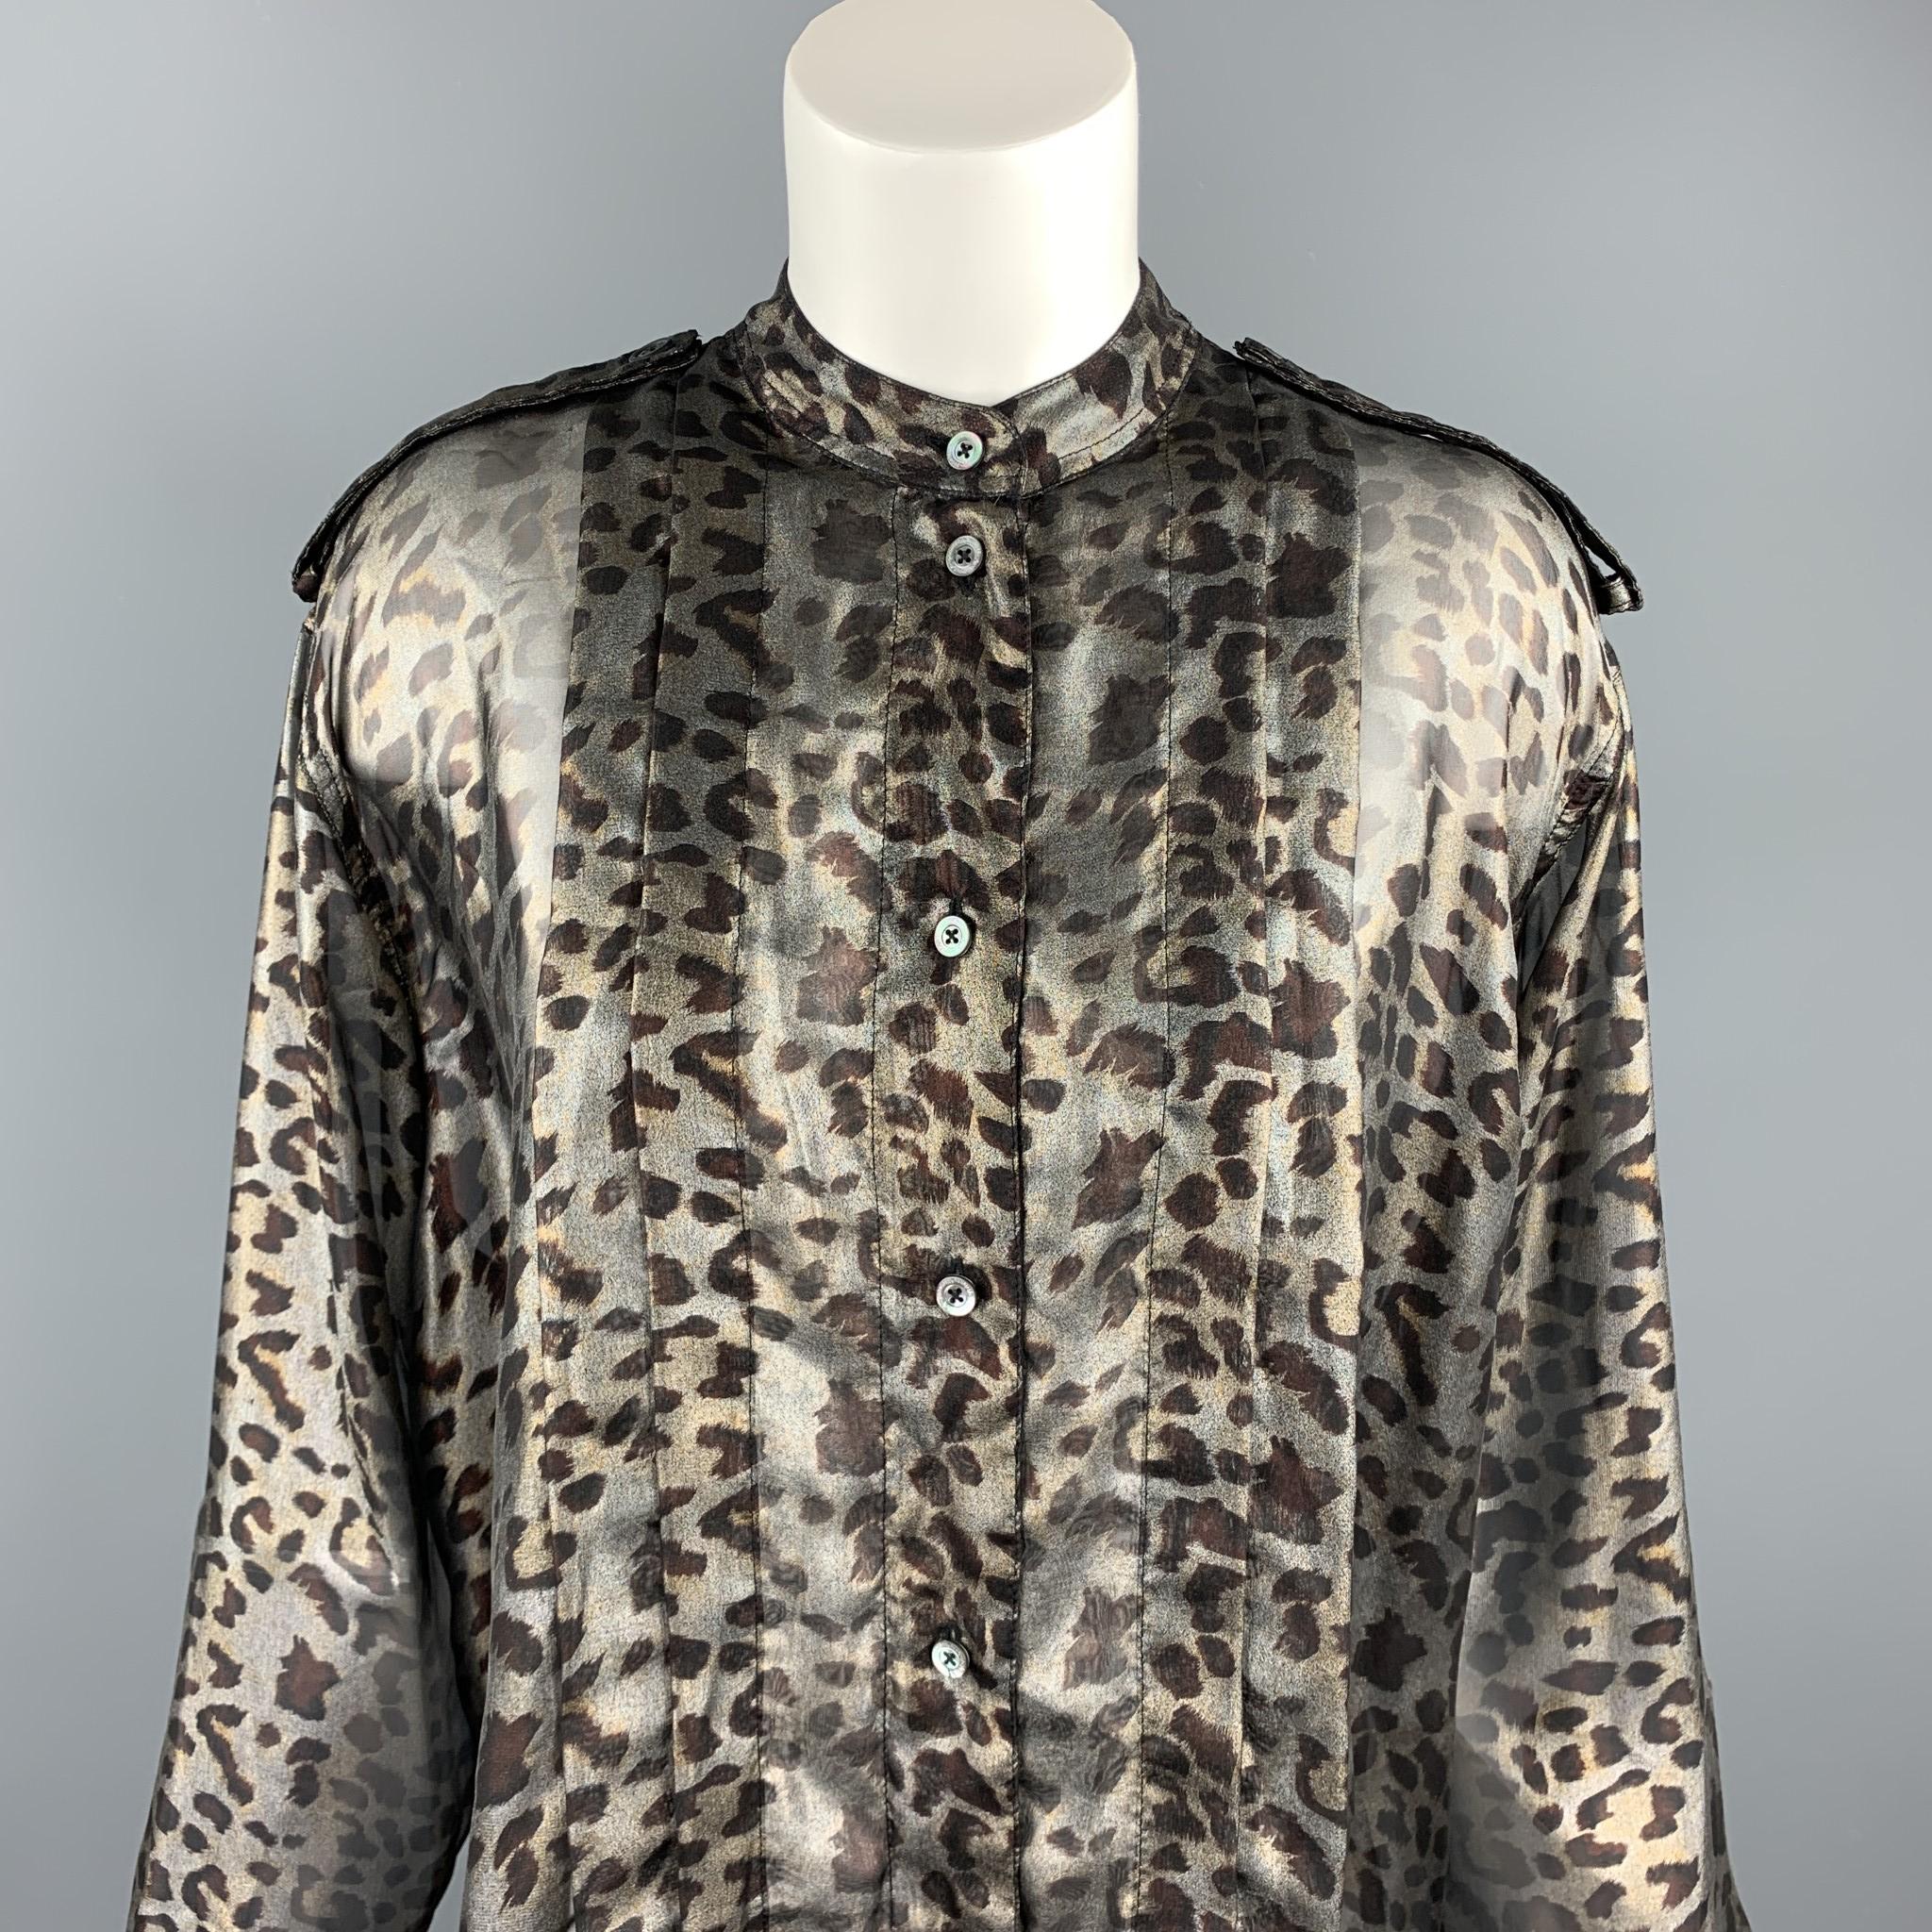 VIVIENNE WESTWOOD ANGLOMANIA shirt comes in a silver & brown leopard polyester featuring a loose fit button up style, epaulettes, front pleated, and a nehru collar. Made in Romania.

Excellent Pre-Owned Condition.
Marked: IT